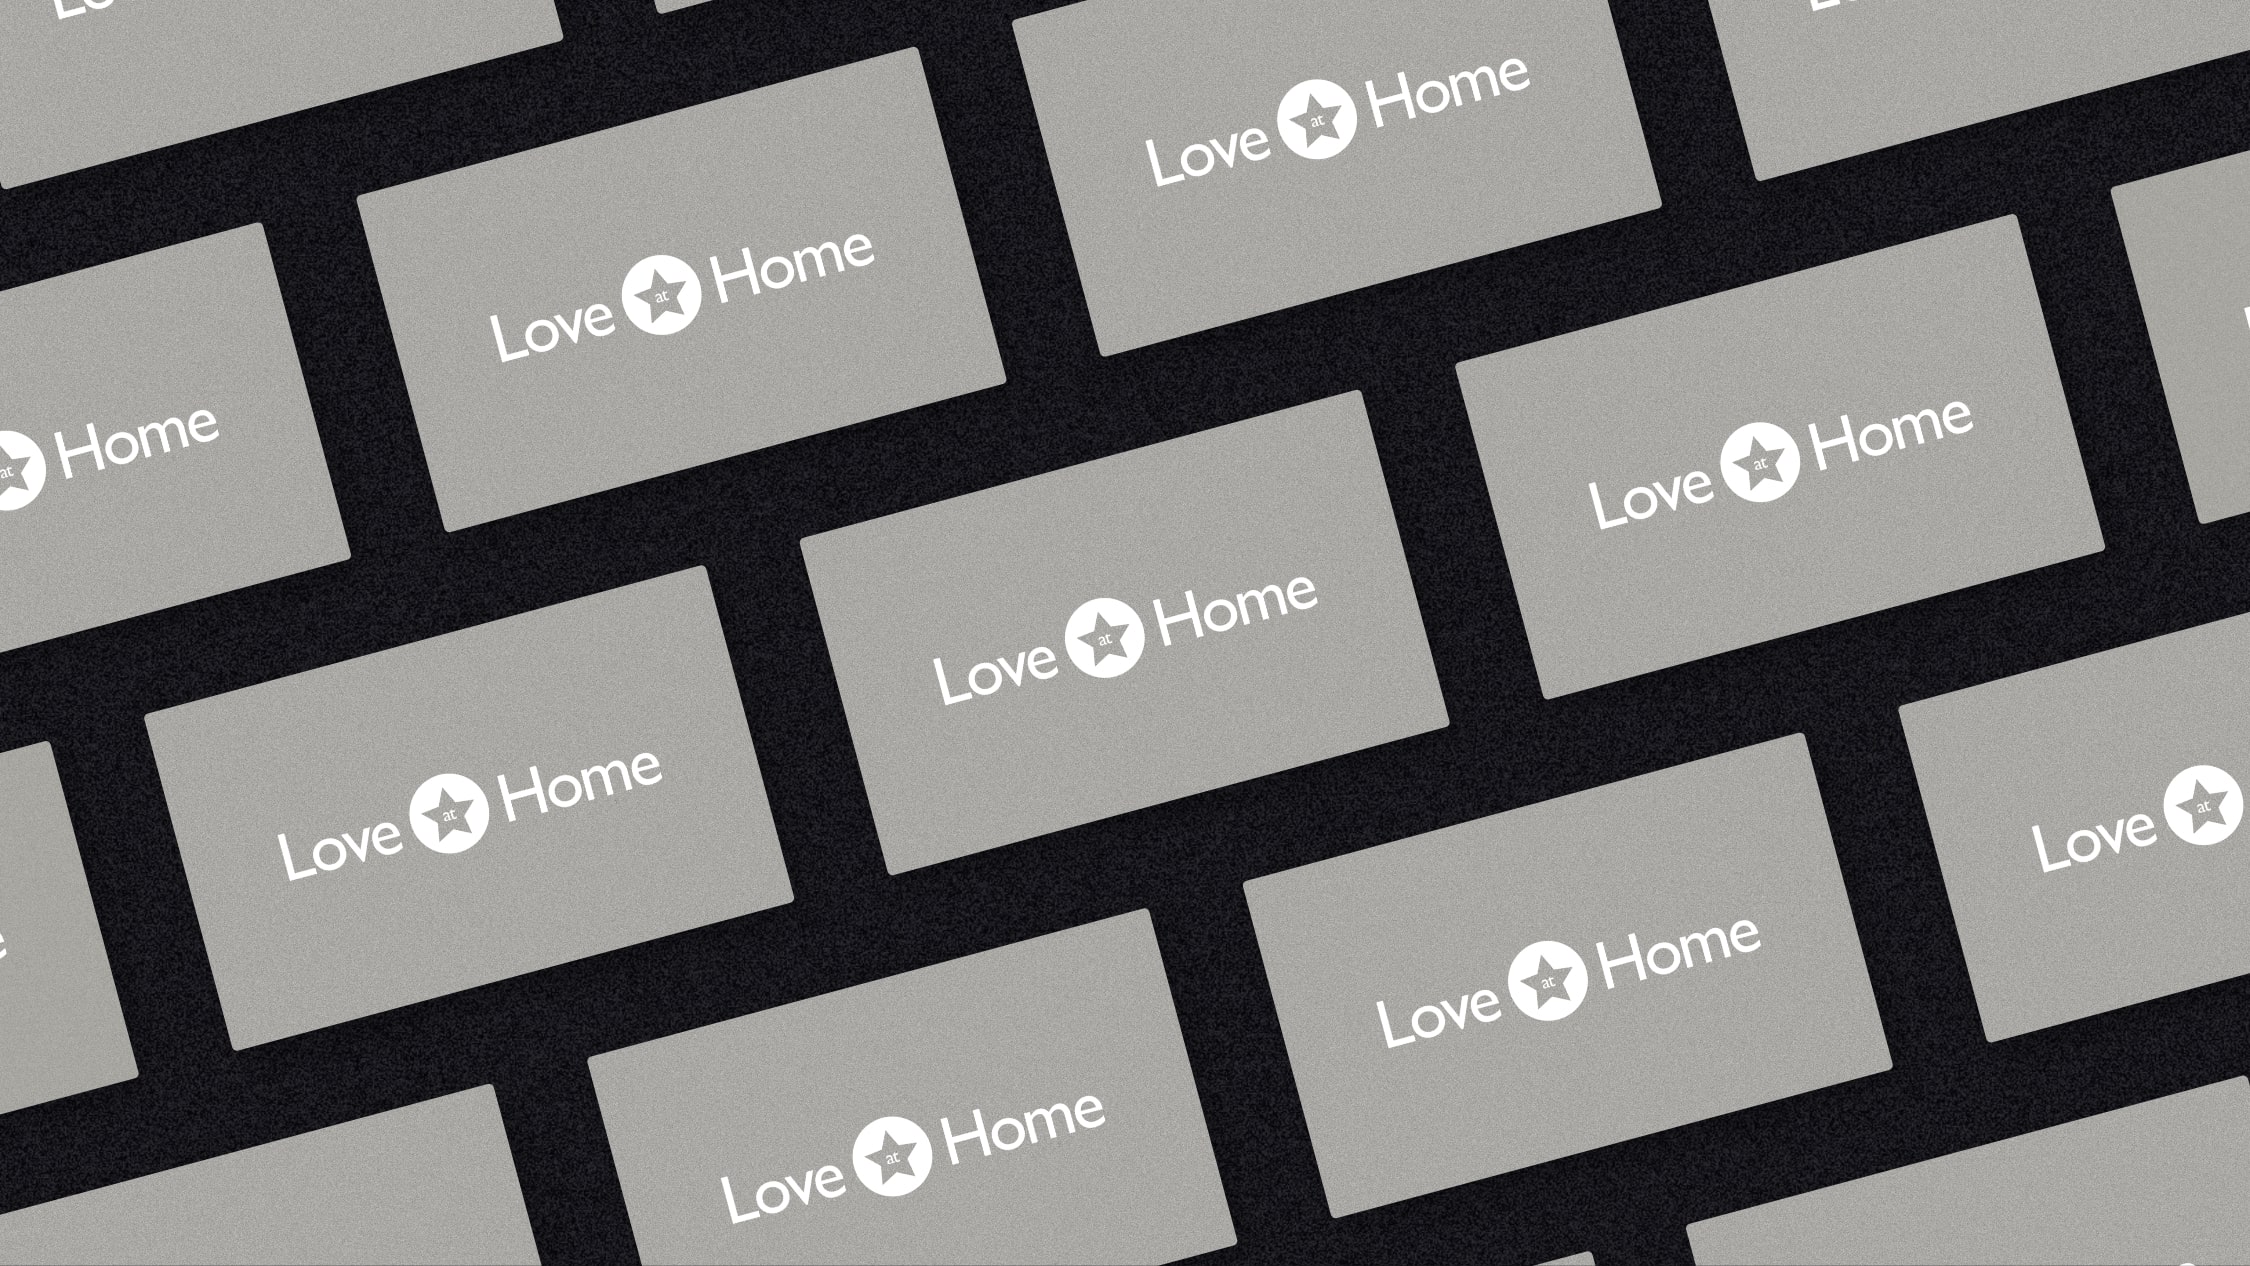 Love at Home beige business cards grid on a dark grey background